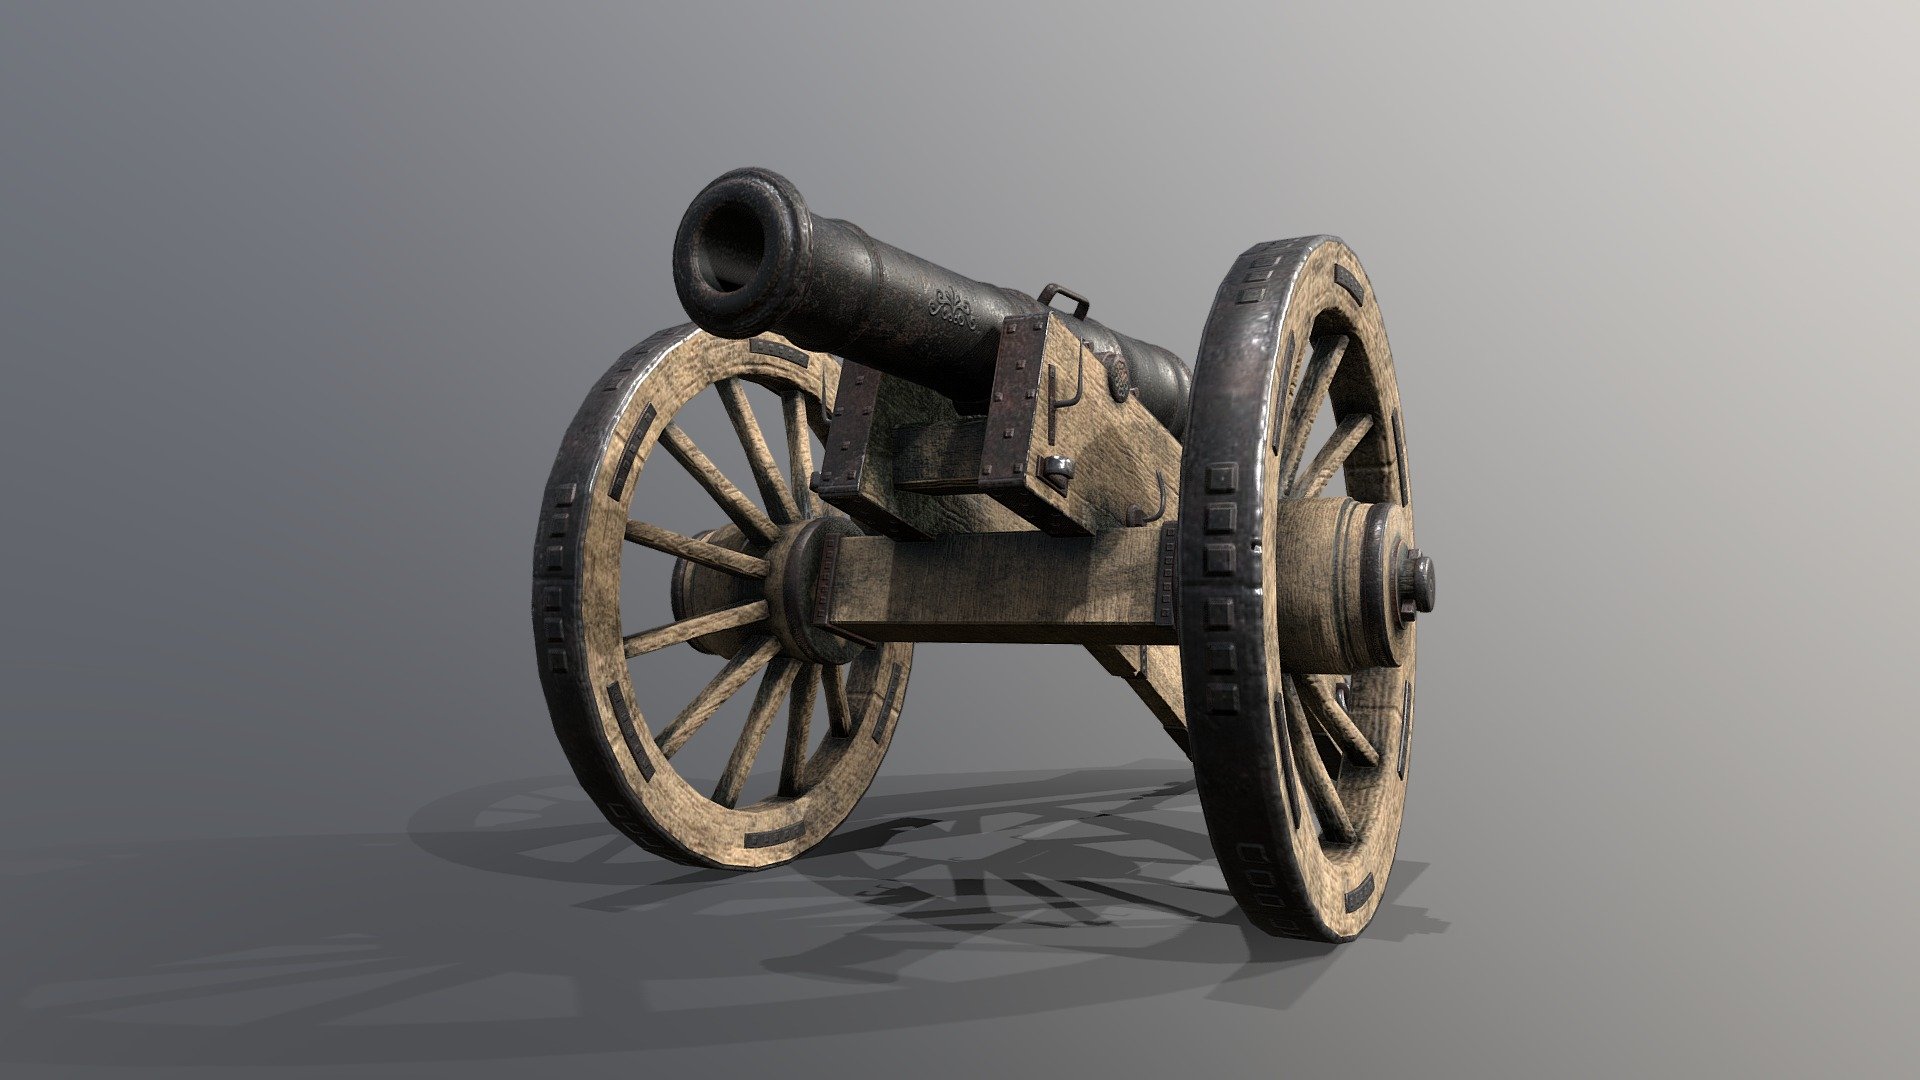 A British Medium 12-Pounder Iron Cannon - Armstrong Design M1736.

Modelled in Blender 2.79/2.80

Tested in 2.93

3 Formats included - .Blend / .Fbx / .Obj + all Textures

All Modifiers closed

Scale 1.000

Real world scale

Lights and Camera are on Layer 2

Textured at 2K using Substance Painter 2

2K textures / PBR: BaseColor, Metallic, Roughness &amp; Normal Maps + Optional Height Map

Polycount:

Verts:34,345

Faces: 33,633

Tri`s: 66,978

Please note if you are using EEVEE:

You may need to go into the Render Properties Tab - Performance - Enable High Quality Normals

Any queries please do get in touch

If you do decide to purchase this Model I wish to thank you in advance

Thanks for your interest &amp; support!

MagicCGIStudios - 12 Pounder Iron Cannon - Armstrong design M1736 - Buy Royalty Free 3D model by MagicCGIStudios 3d model